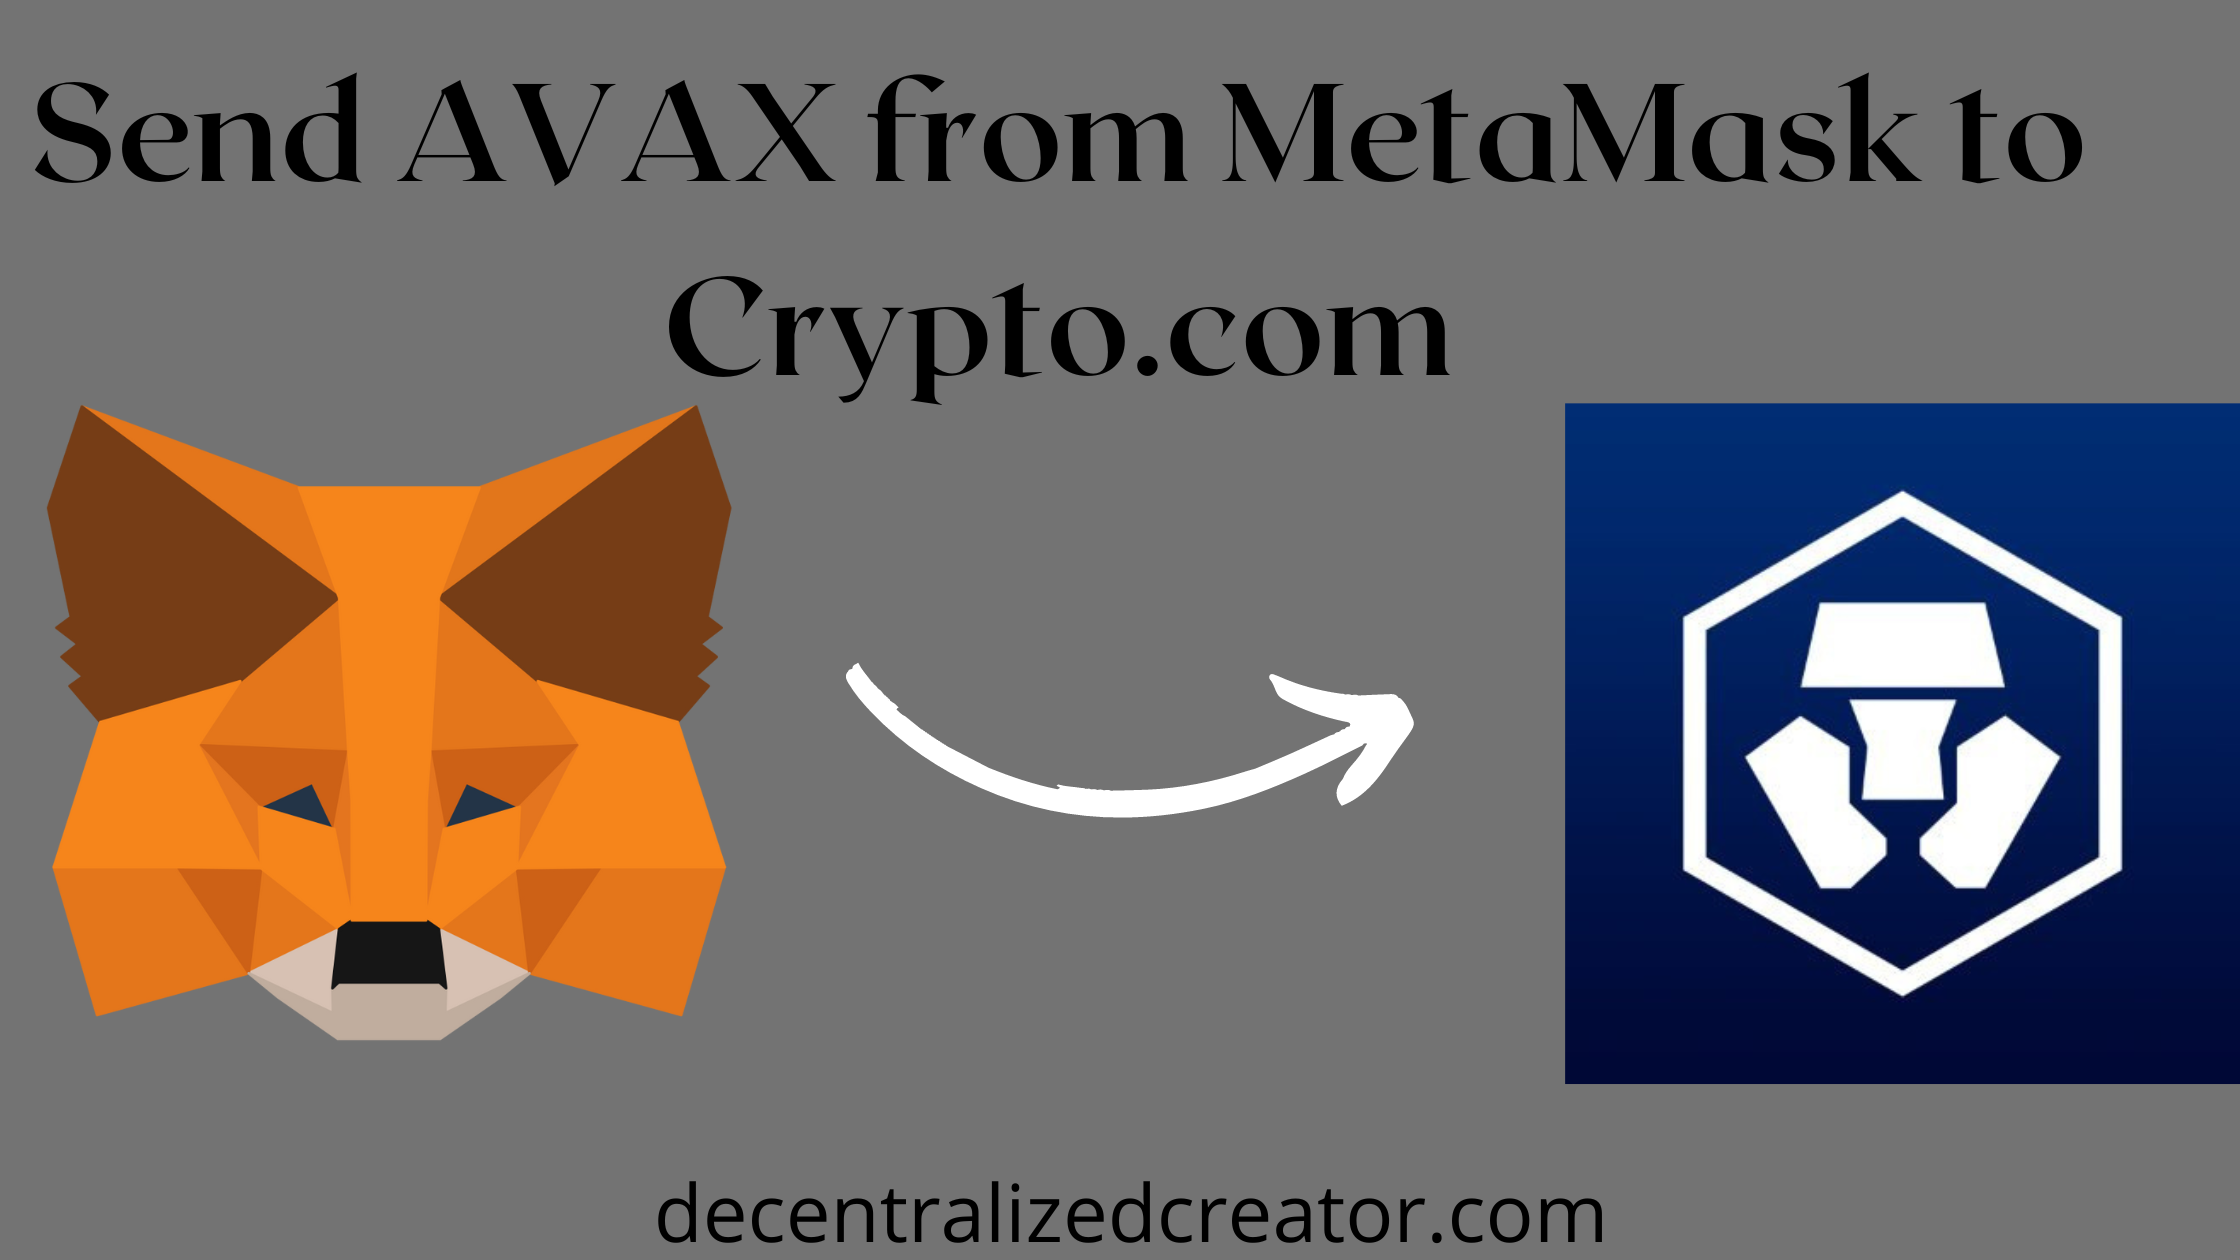 AVAX from MetaMask to Crypto.com